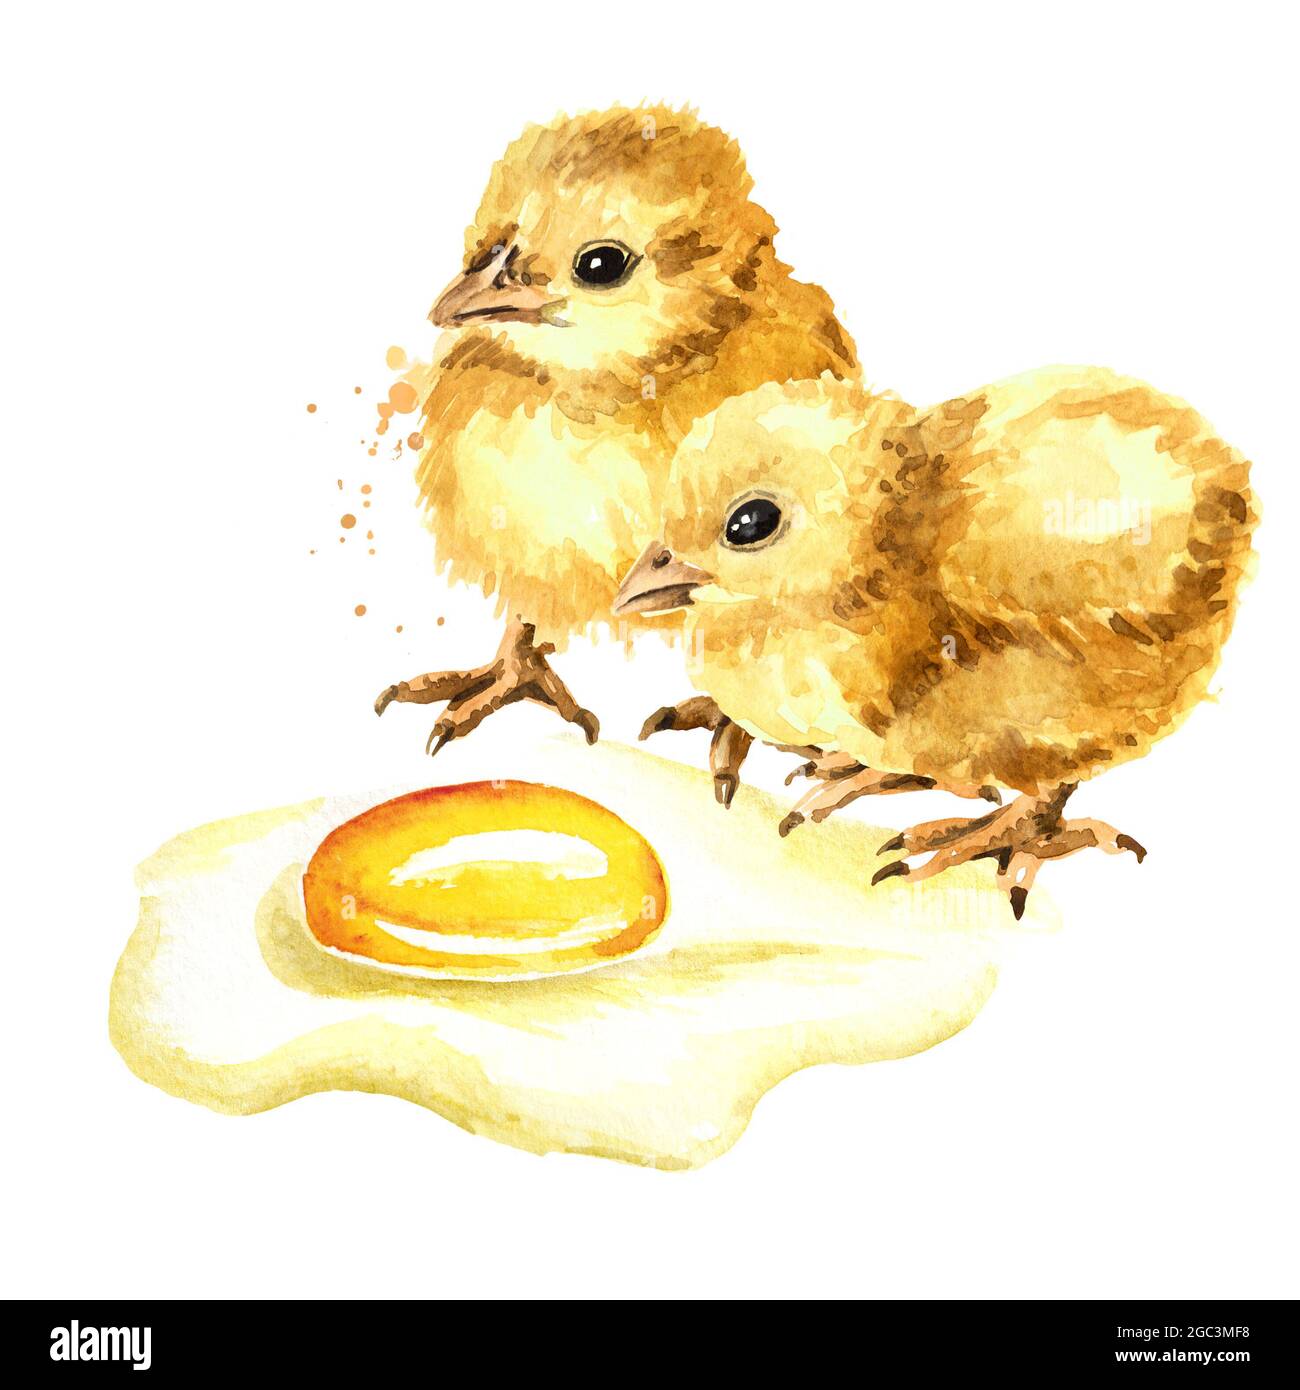 19,435 Baby Chicks Drawing Images, Stock Photos, 3D objects, & Vectors |  Shutterstock